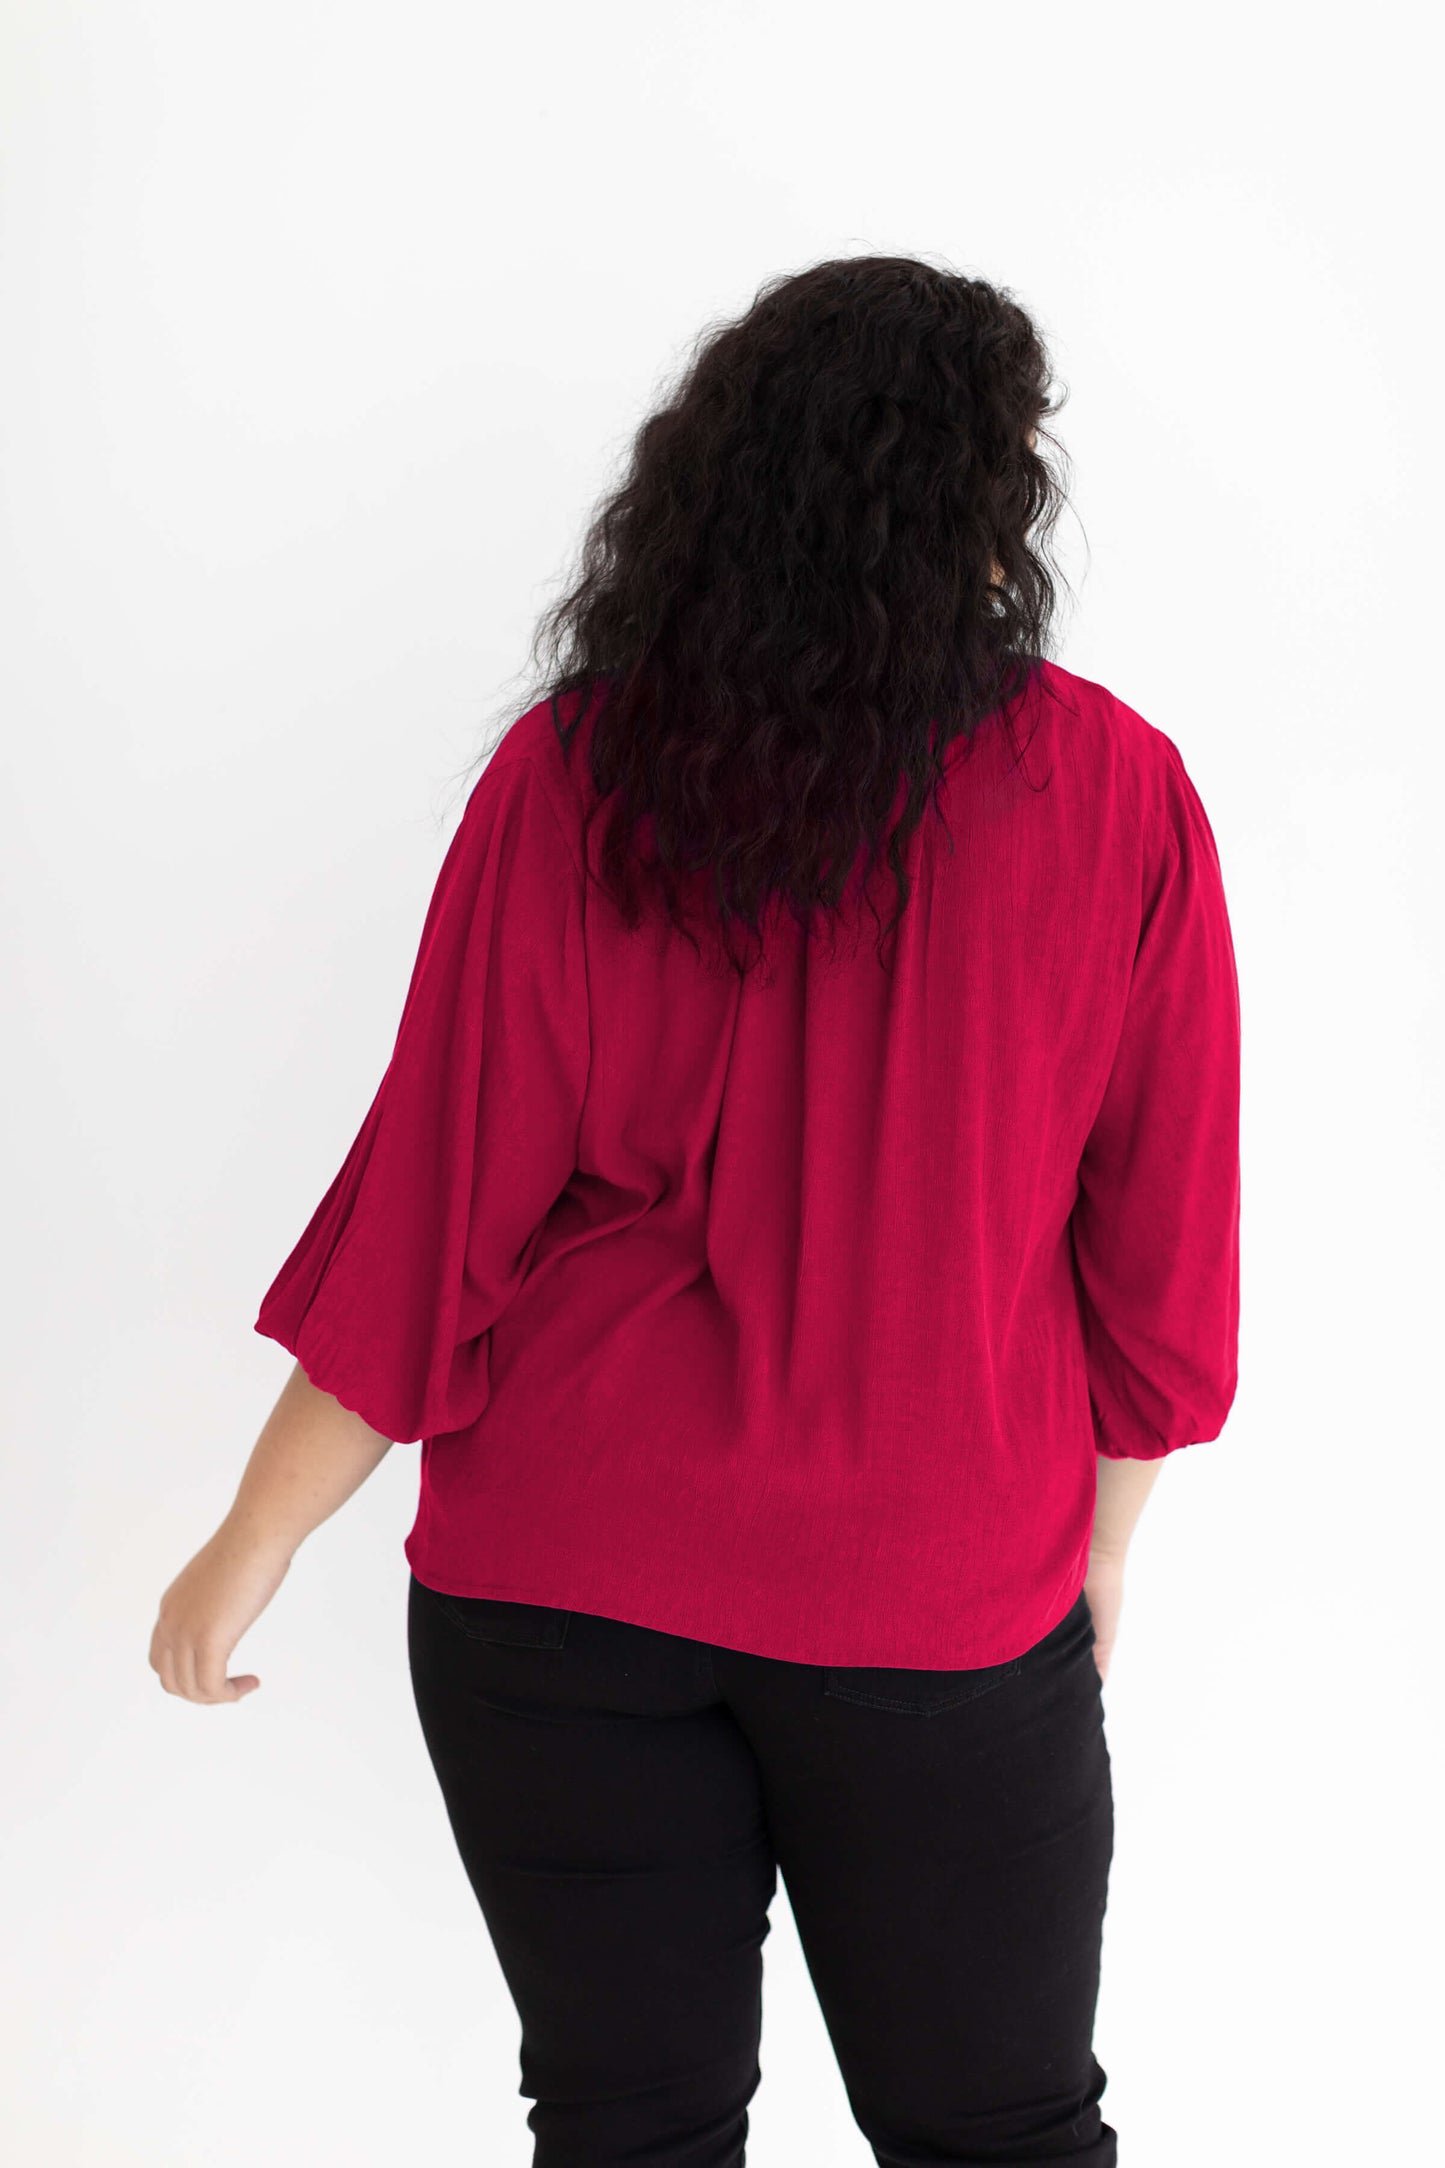 Alesia Blouse Top in French Plum - Final Sale